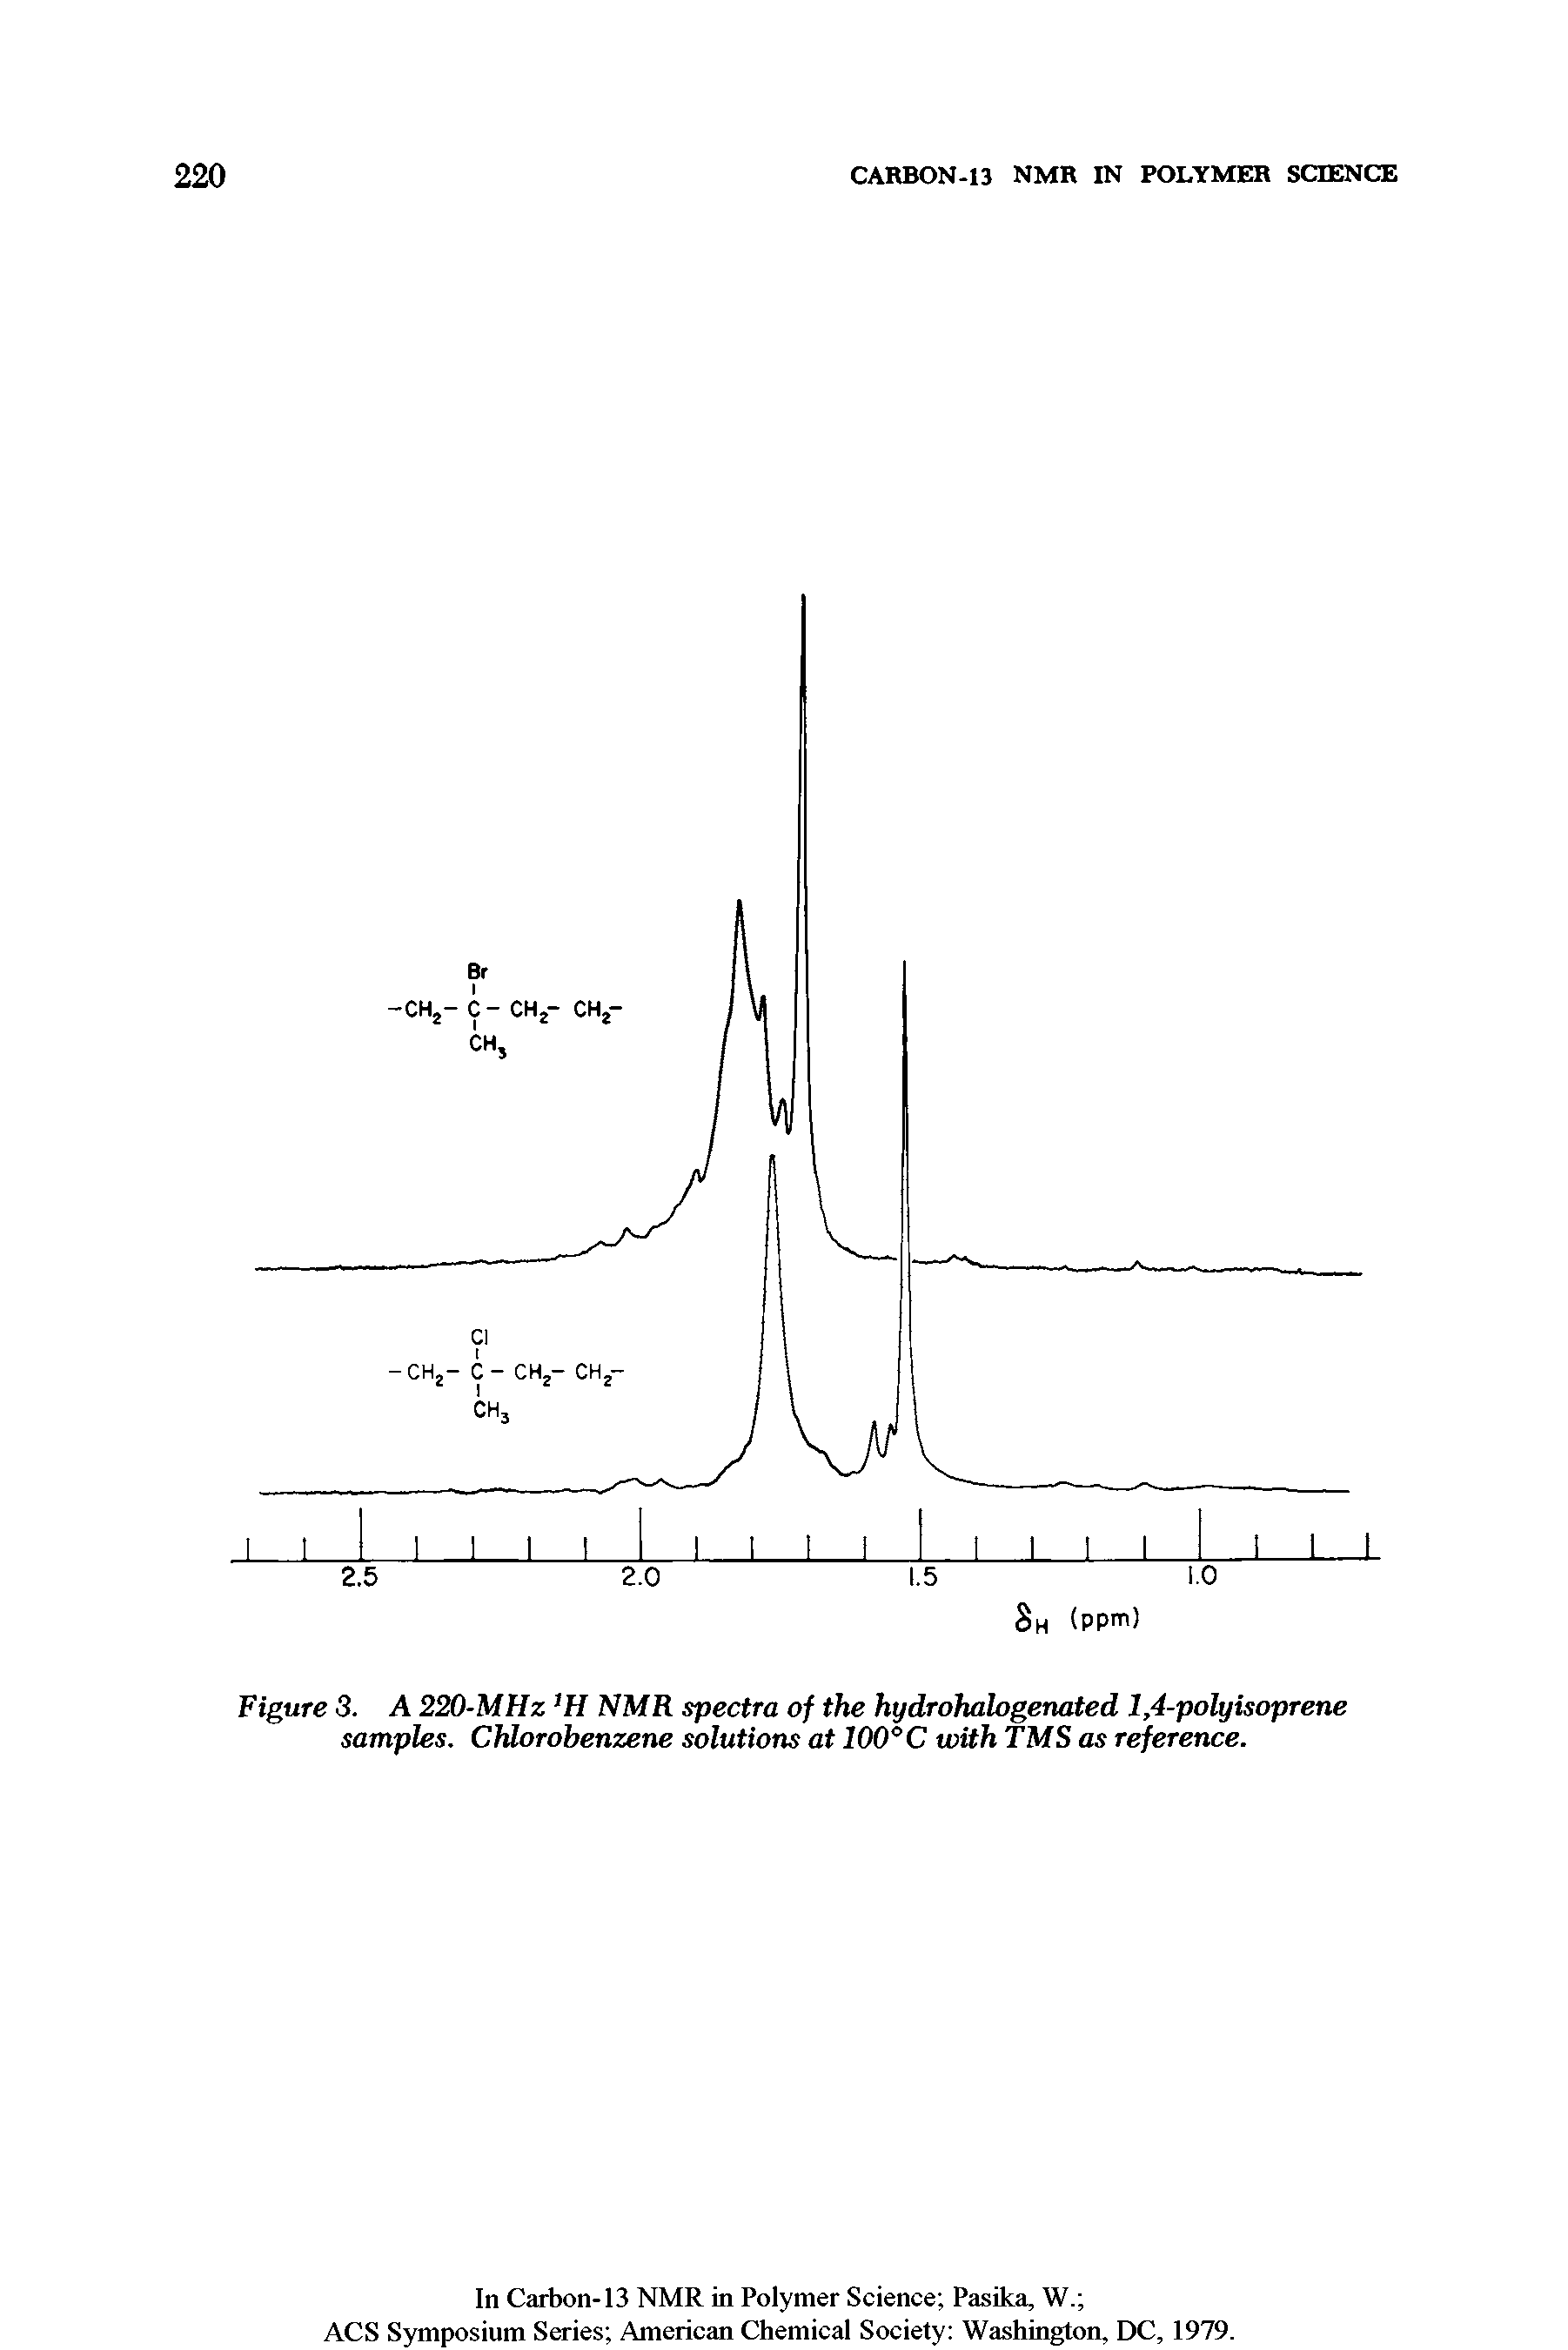 Figure 3. A 220-MHz NMR spectra of the hydrohalogenated 1,4-polyisoprene samples. Chlorobenzene solutions at 100°C with TMS as reference.